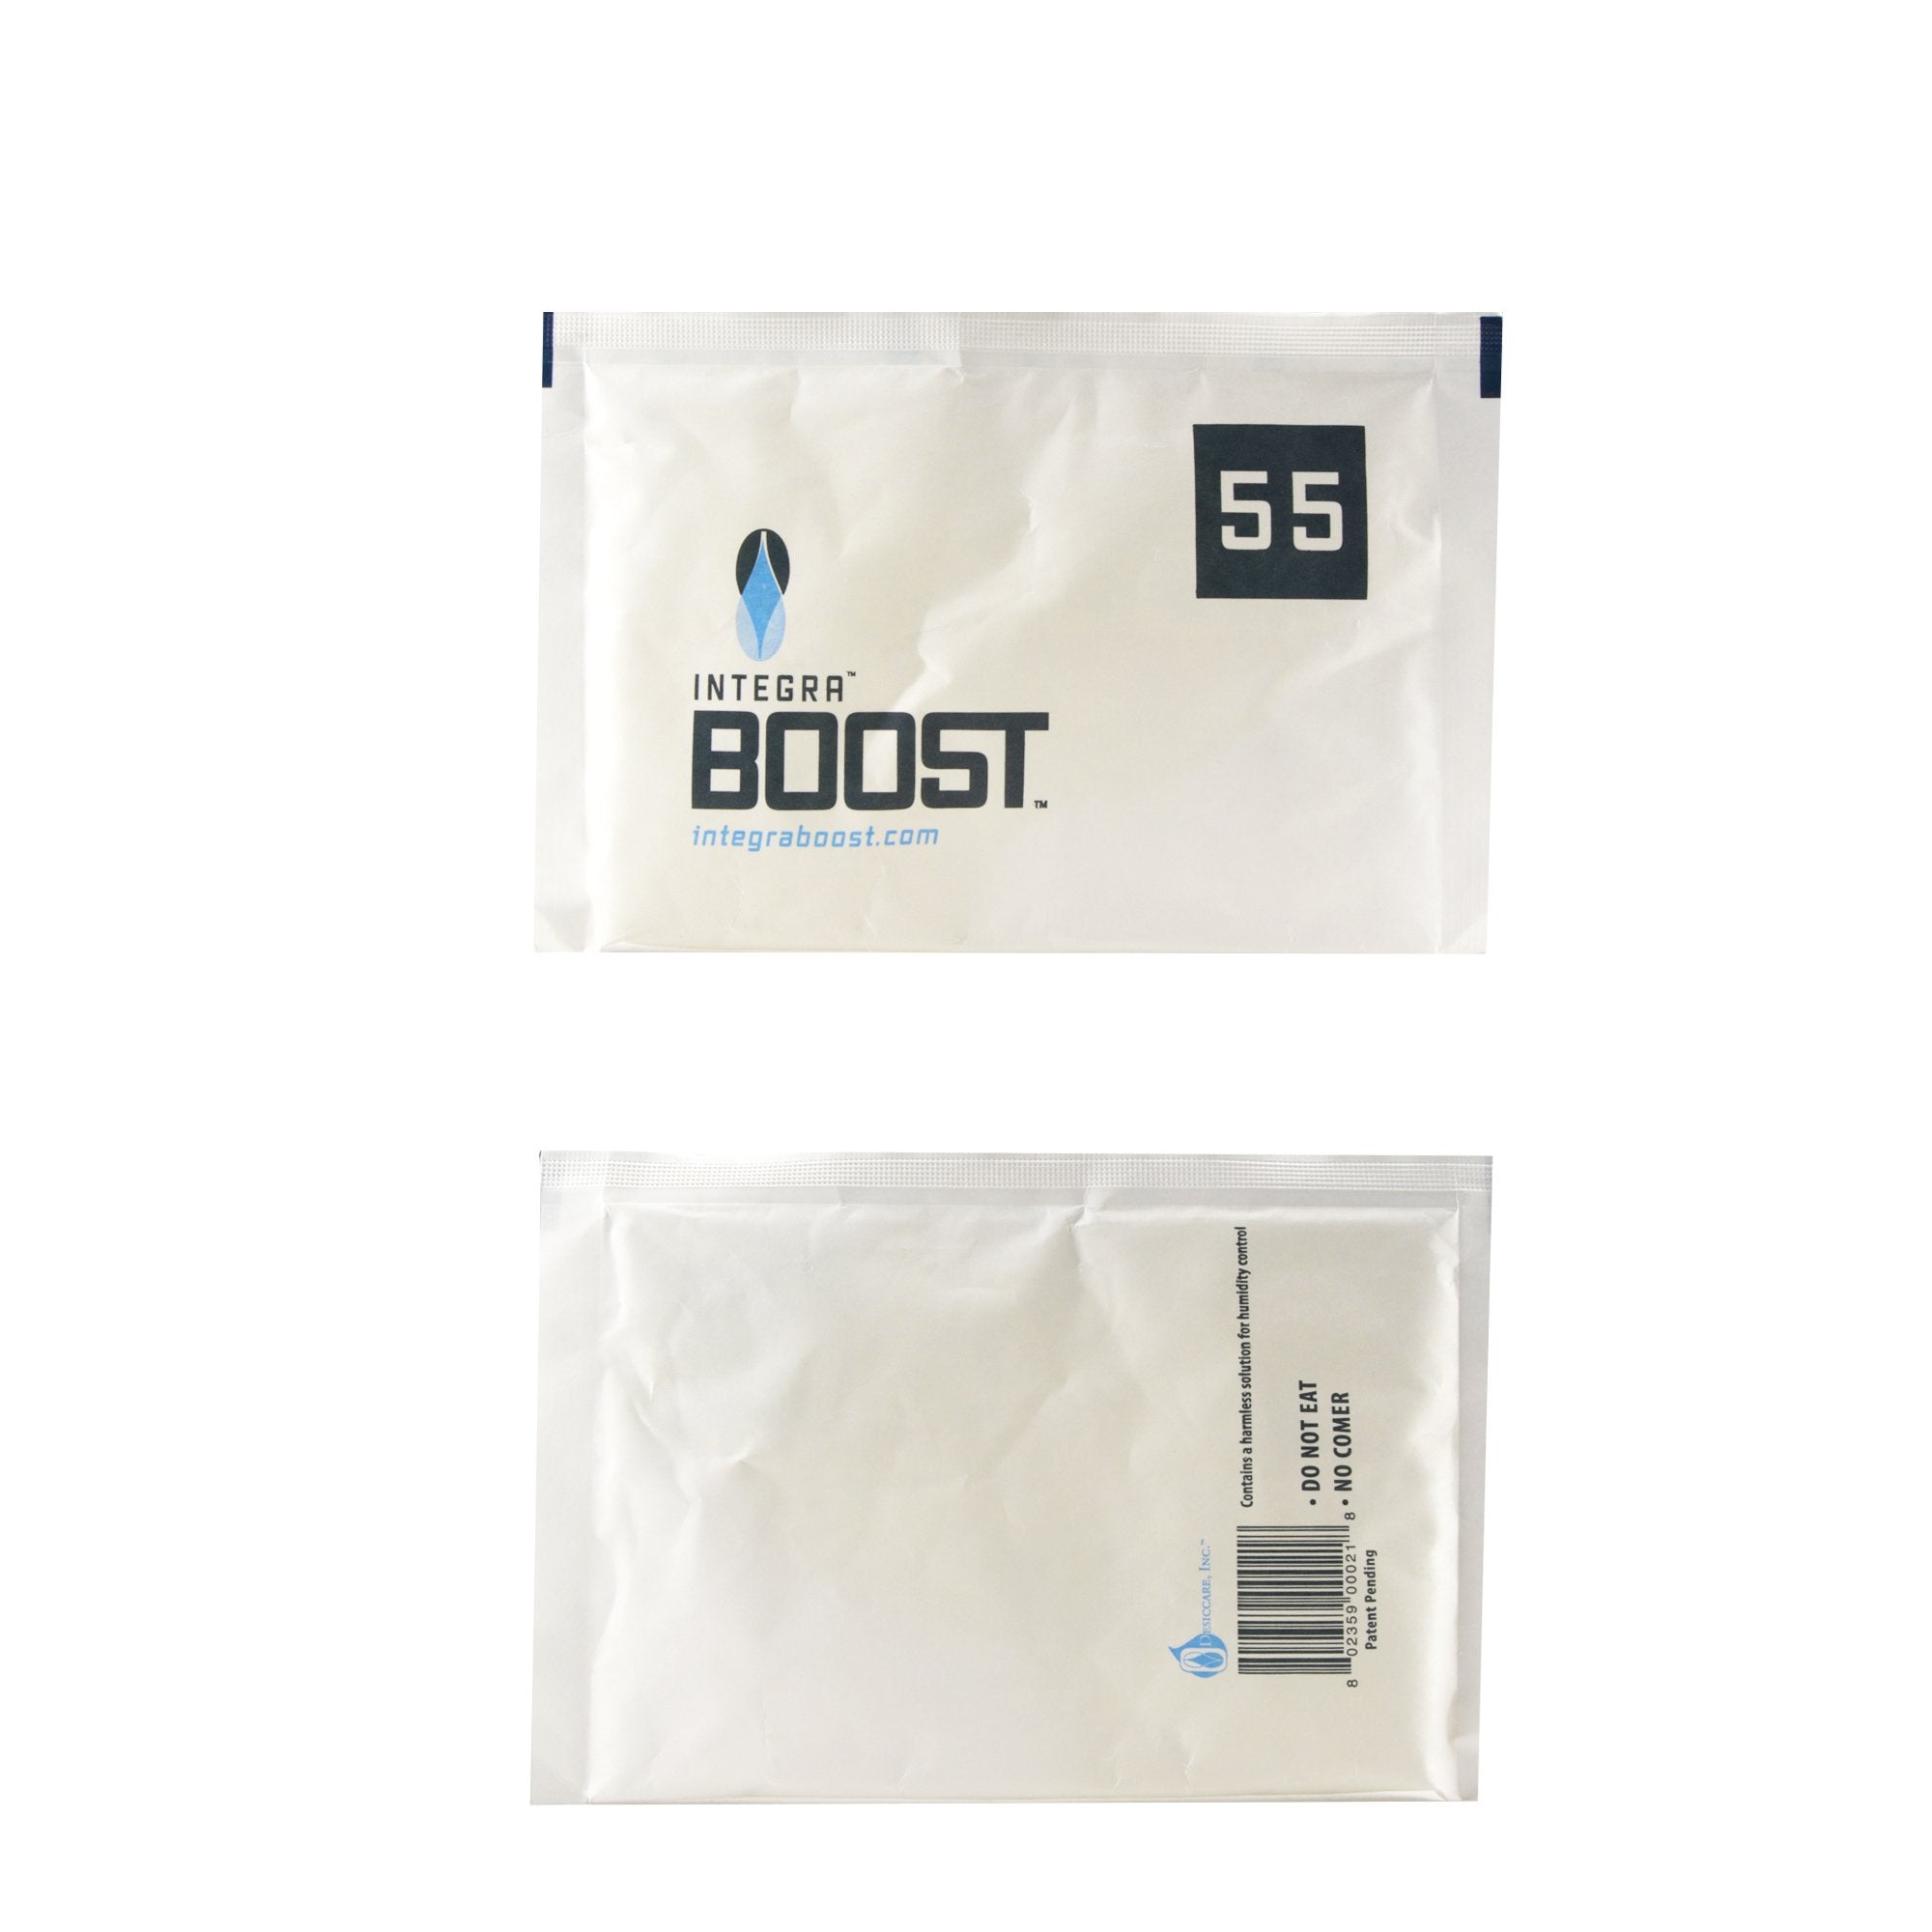 INTEGRA | 'Retail Display' Boost Large Humidity Pack | 67 Grams - 55% - 12 Count - 3